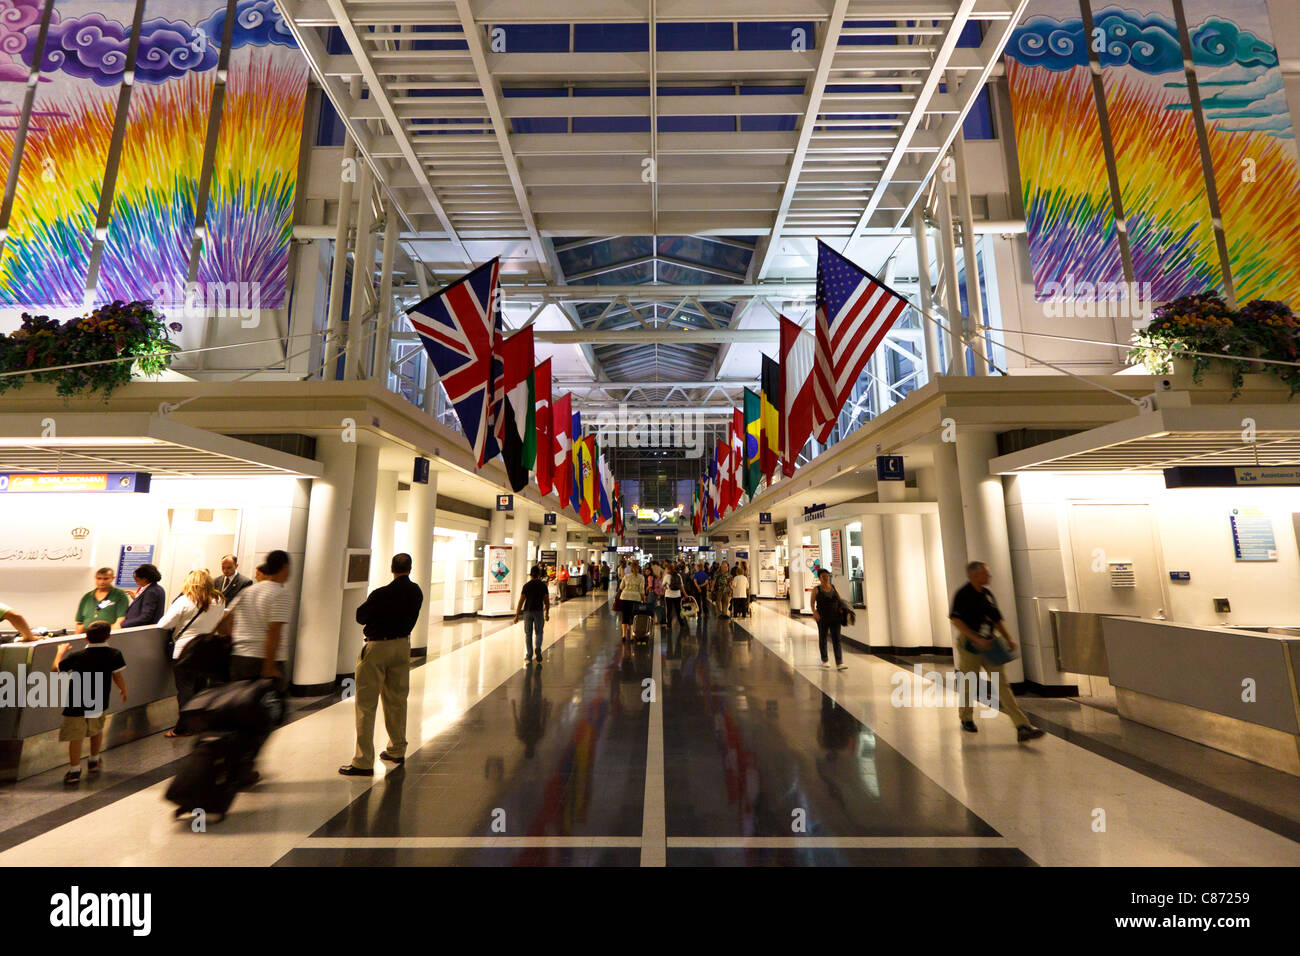 View inside O'Hare International Airport Terminal 5 showing the flags of different countries - Chicago, IL Stock Photo - Alamy